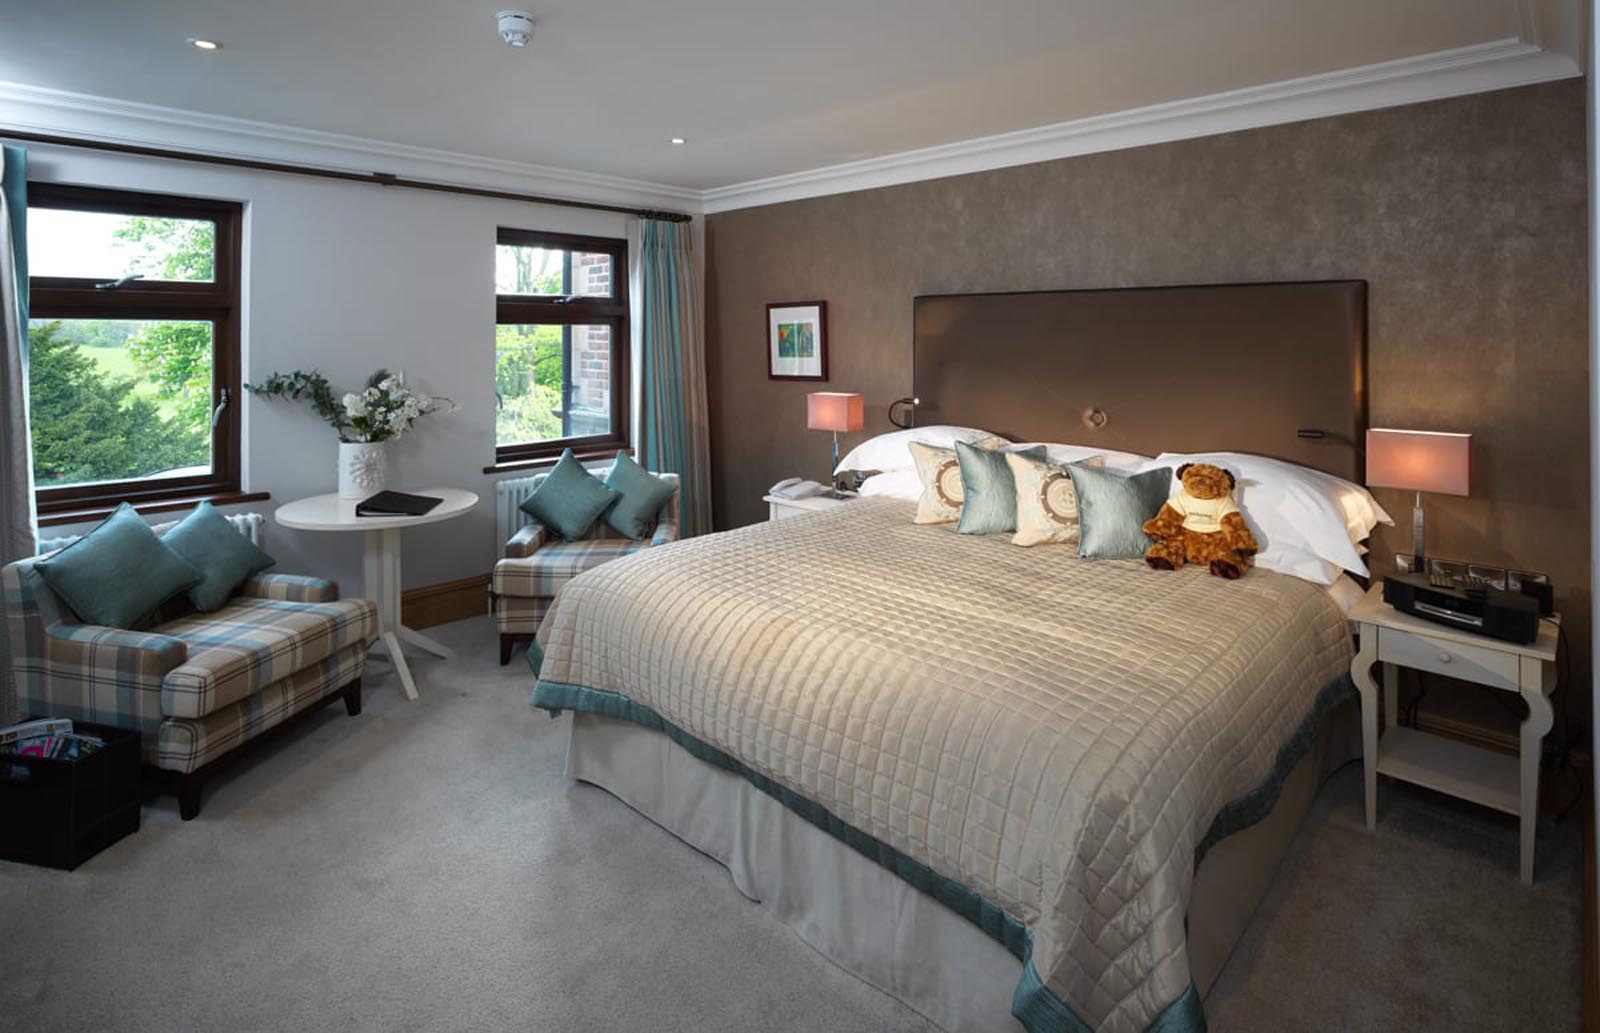 A large double bed and seating area